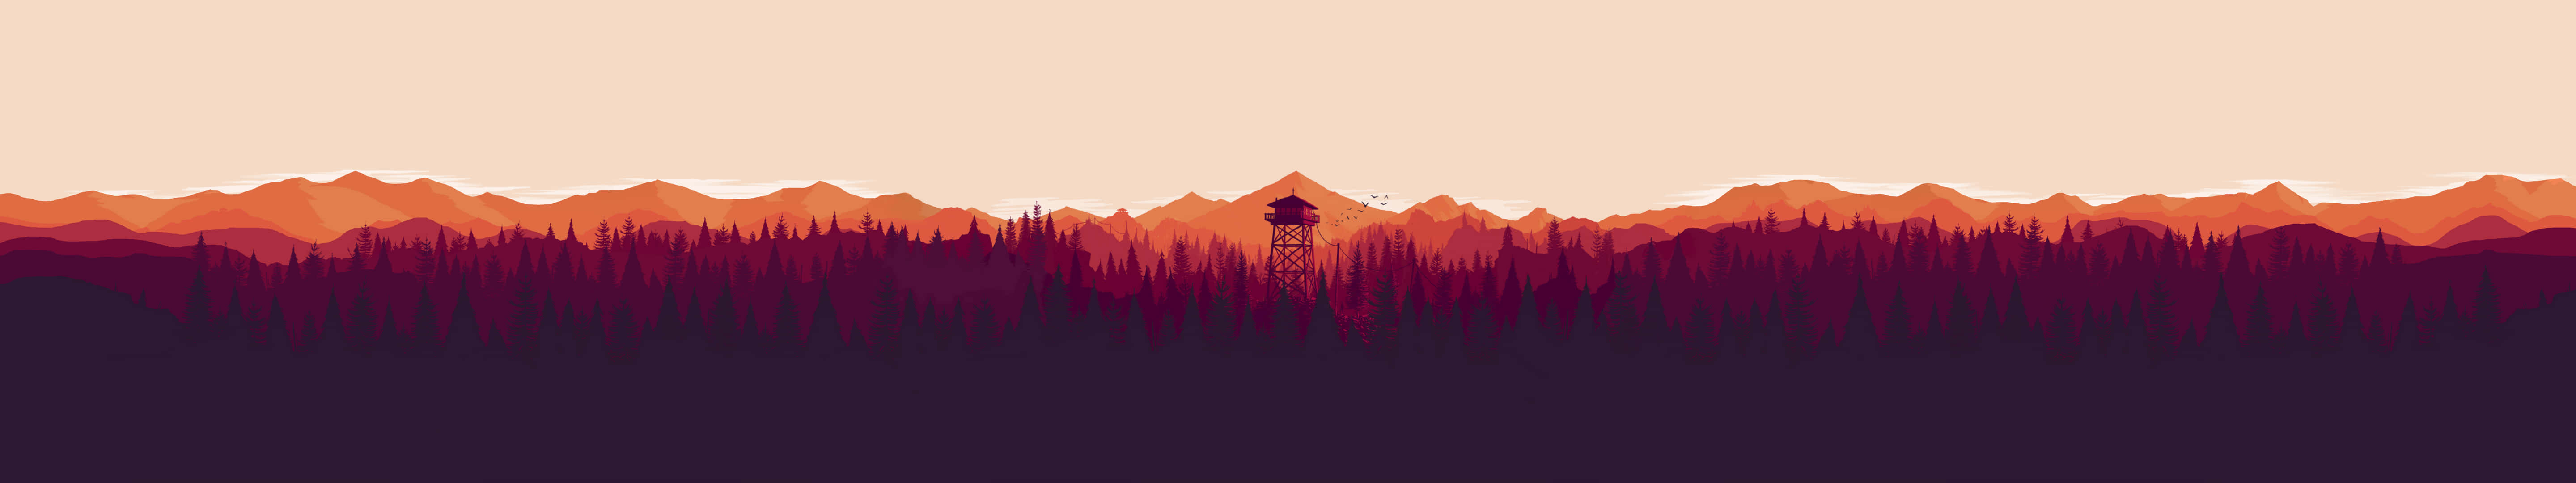 A Man Is Standing In The Mountains With A Red And Orange Background Wallpaper